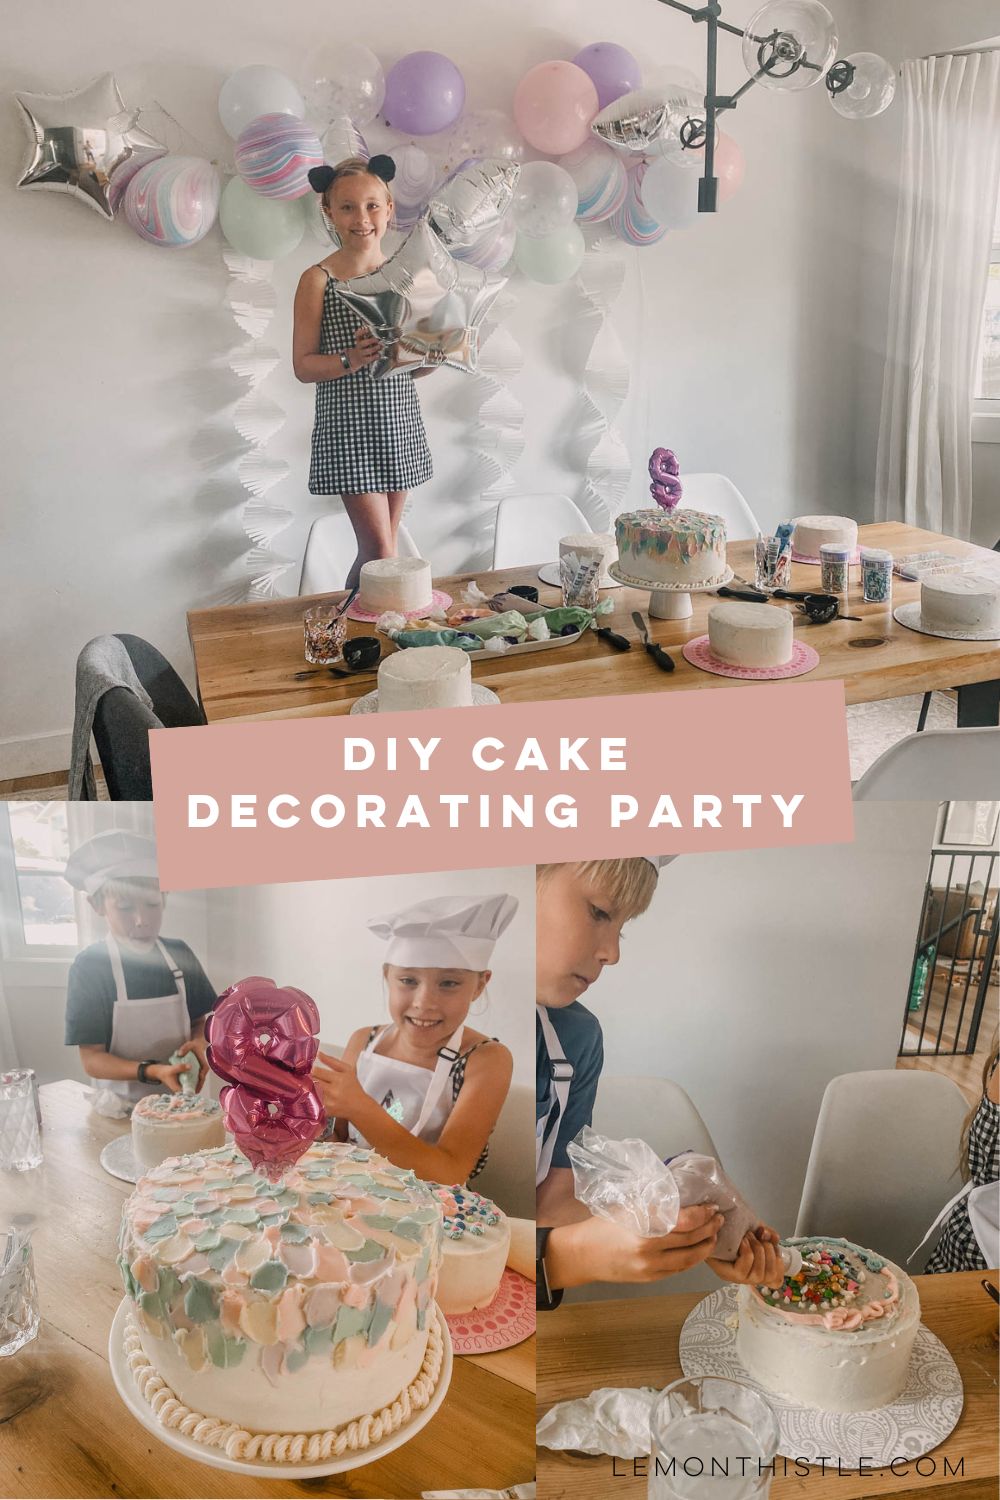 DIY Cake Decorating Party collage with text over